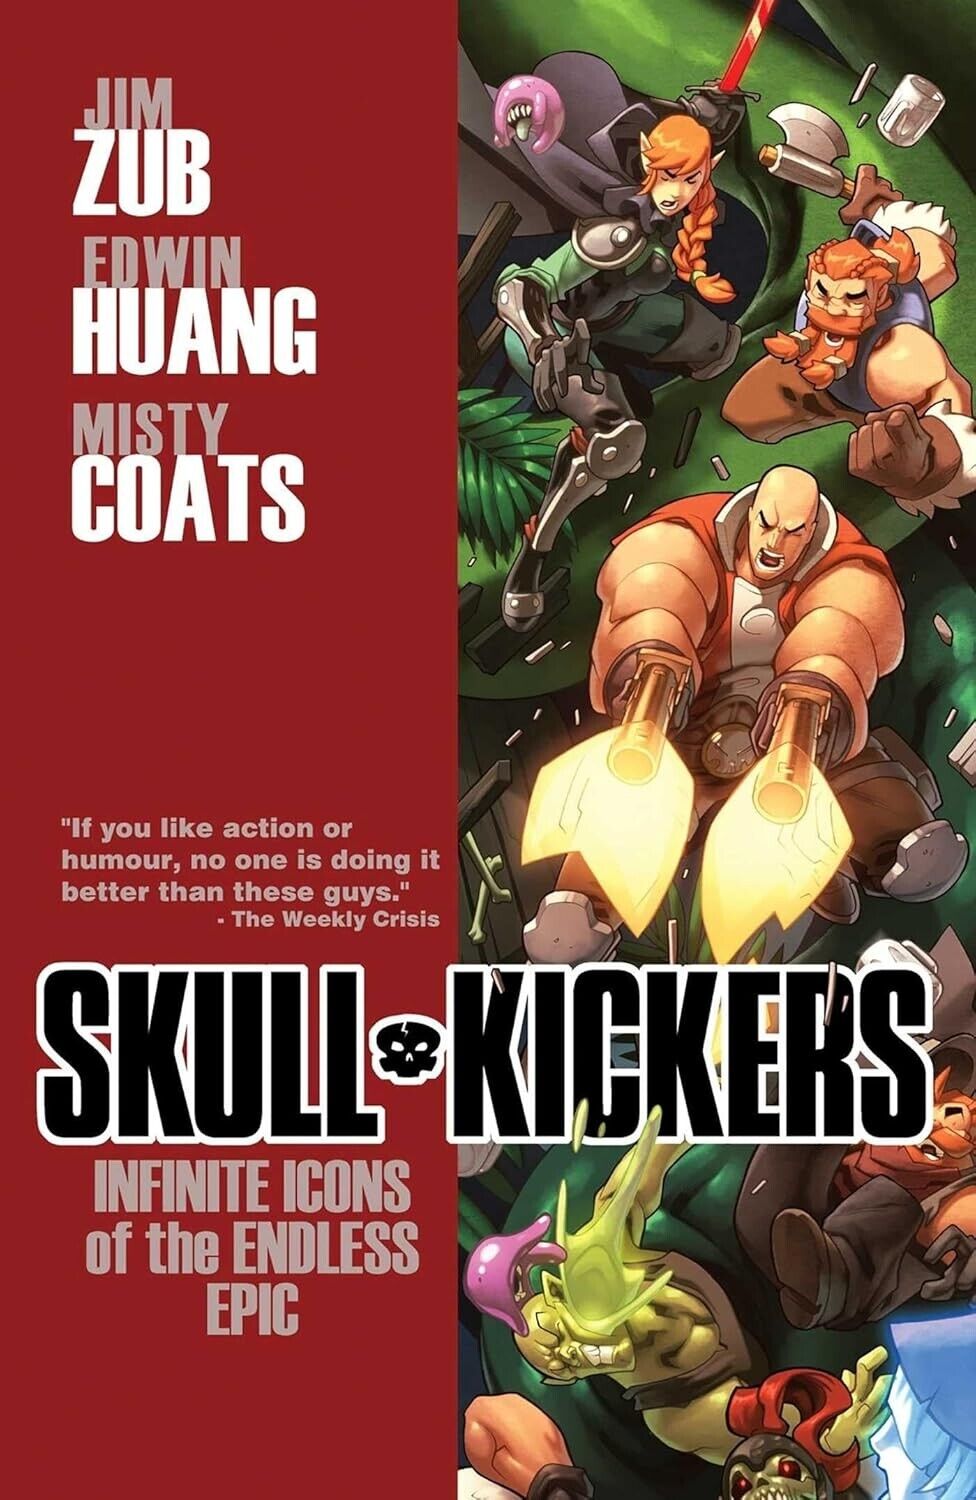 Skull Kickers V 6 Infinite Icons of the Endless Epic NEW Graphic Novel Image